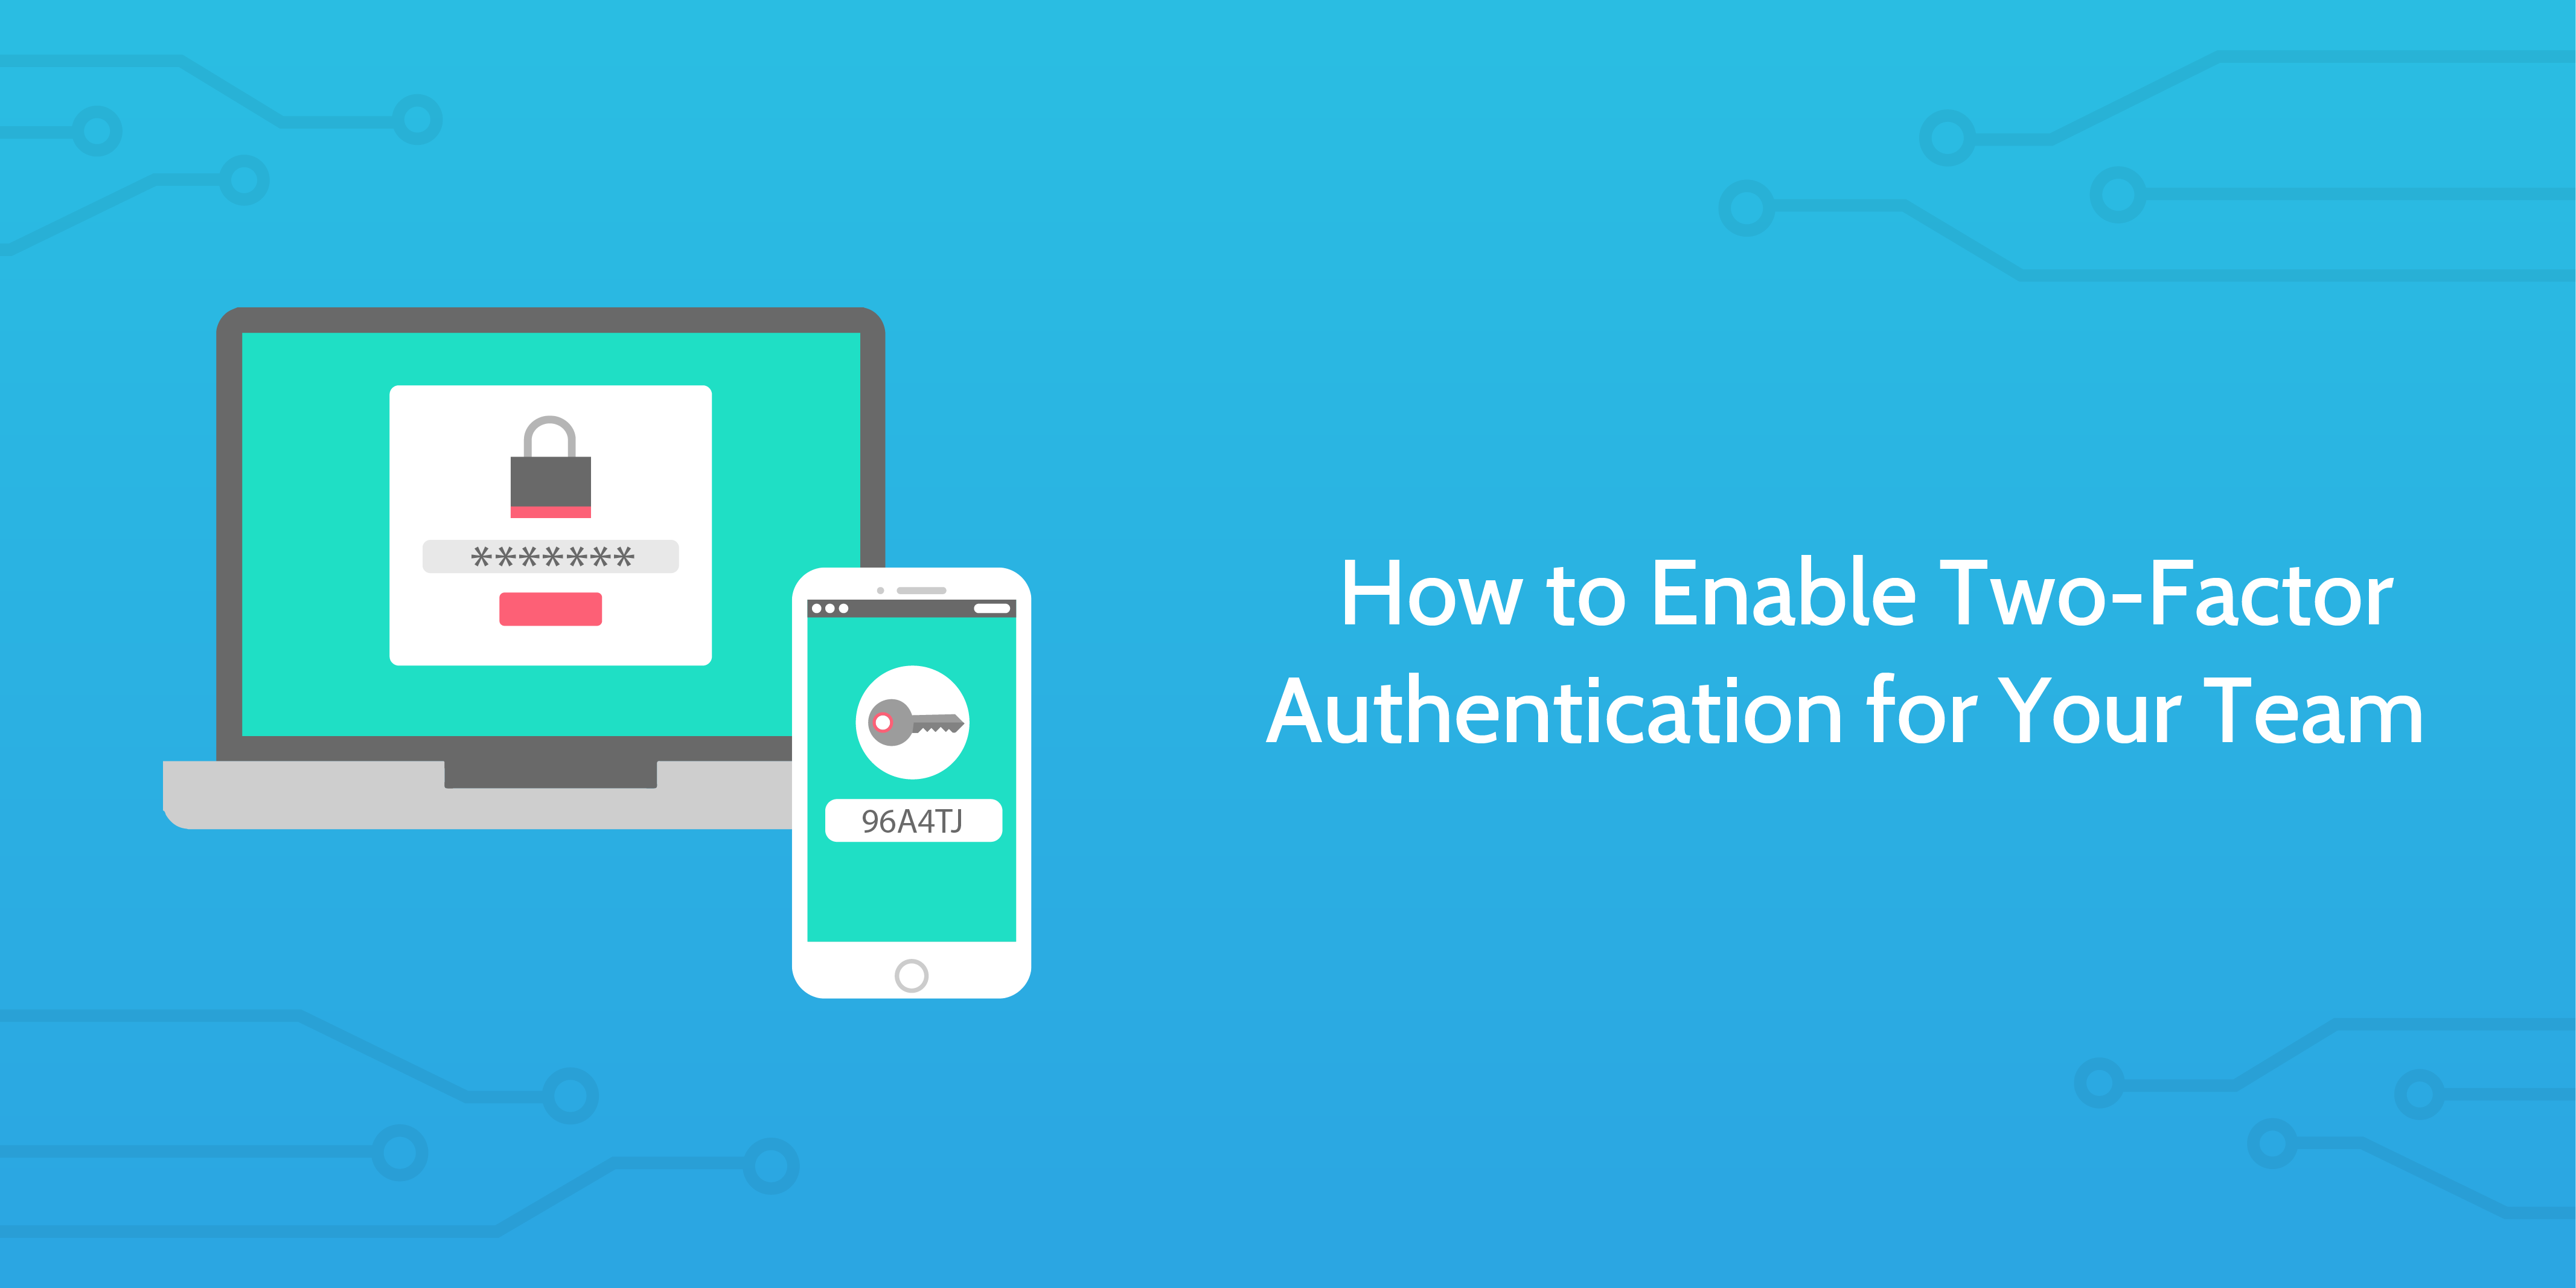 Enable two-factor authentication: Protect your Facebook account by setting up two-factor authentication, which adds an extra layer of security.
Keep your device software up to date: Regularly update your phone's operating system to ensure you have the latest security patches and fixes.